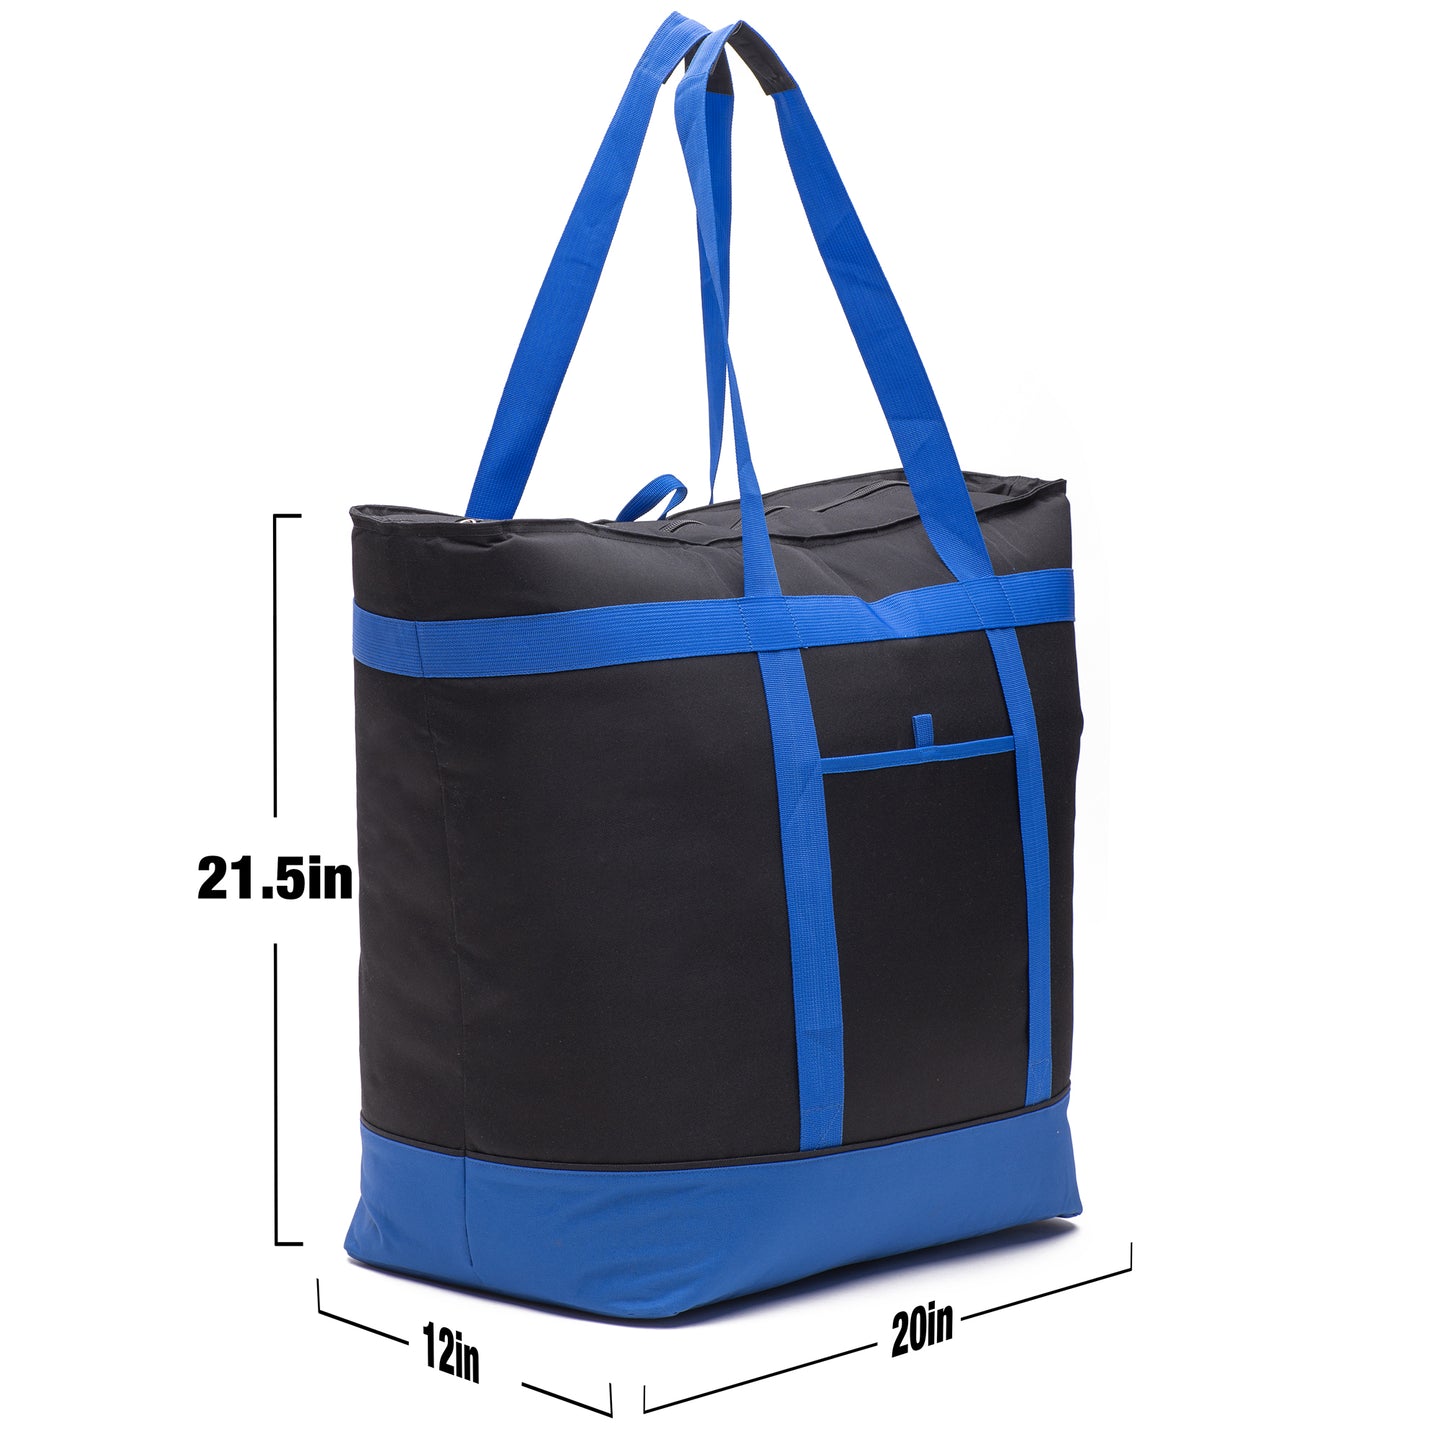 XXX-Large Insulated Cooler Tote for Shopping, Grocery Trips, Pizza Delivery, Camping, Beach.